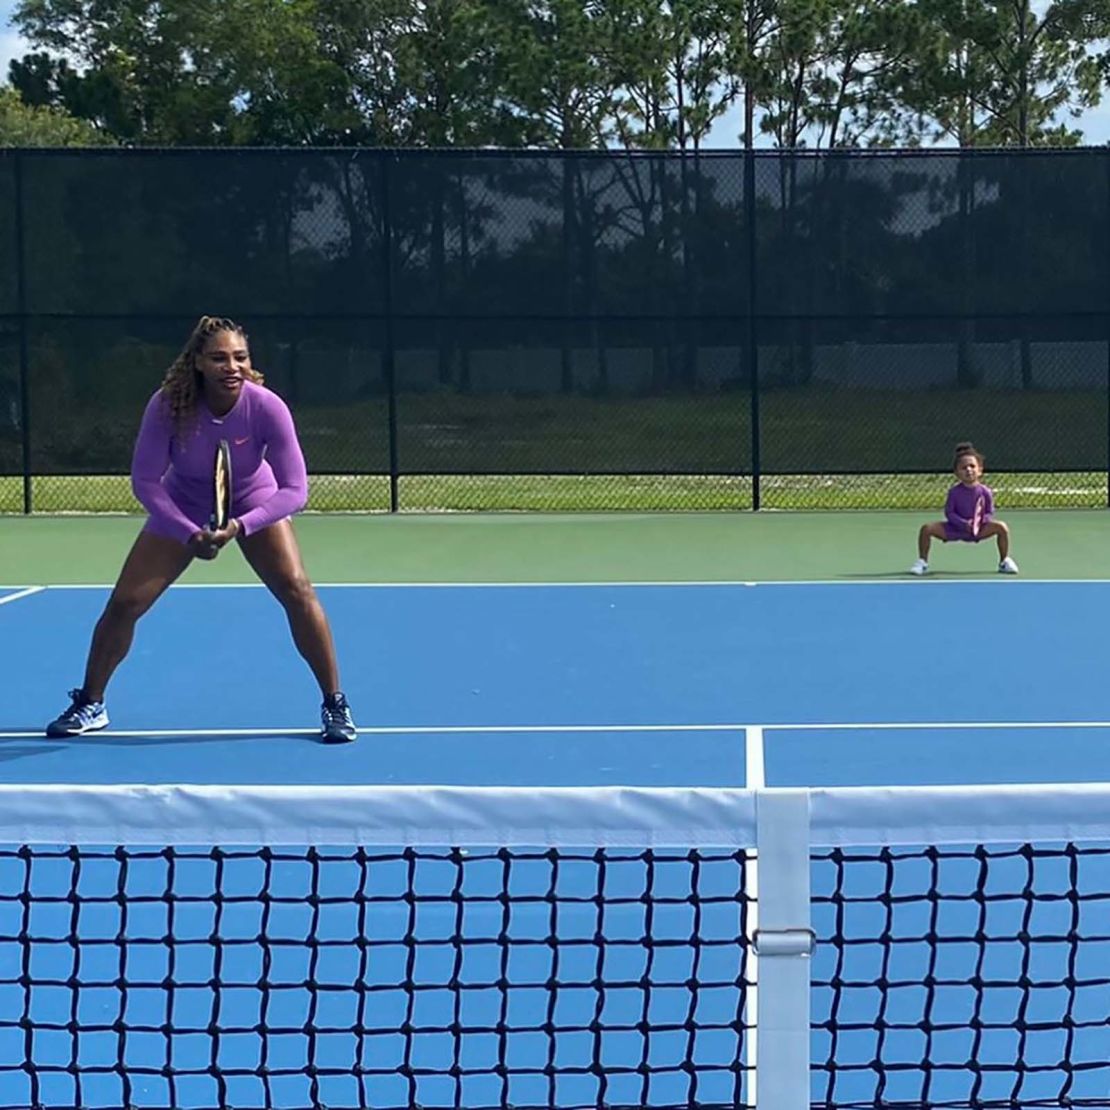 Serena Williams has taken to the court with her daughter Olympia with competitions on hold. 